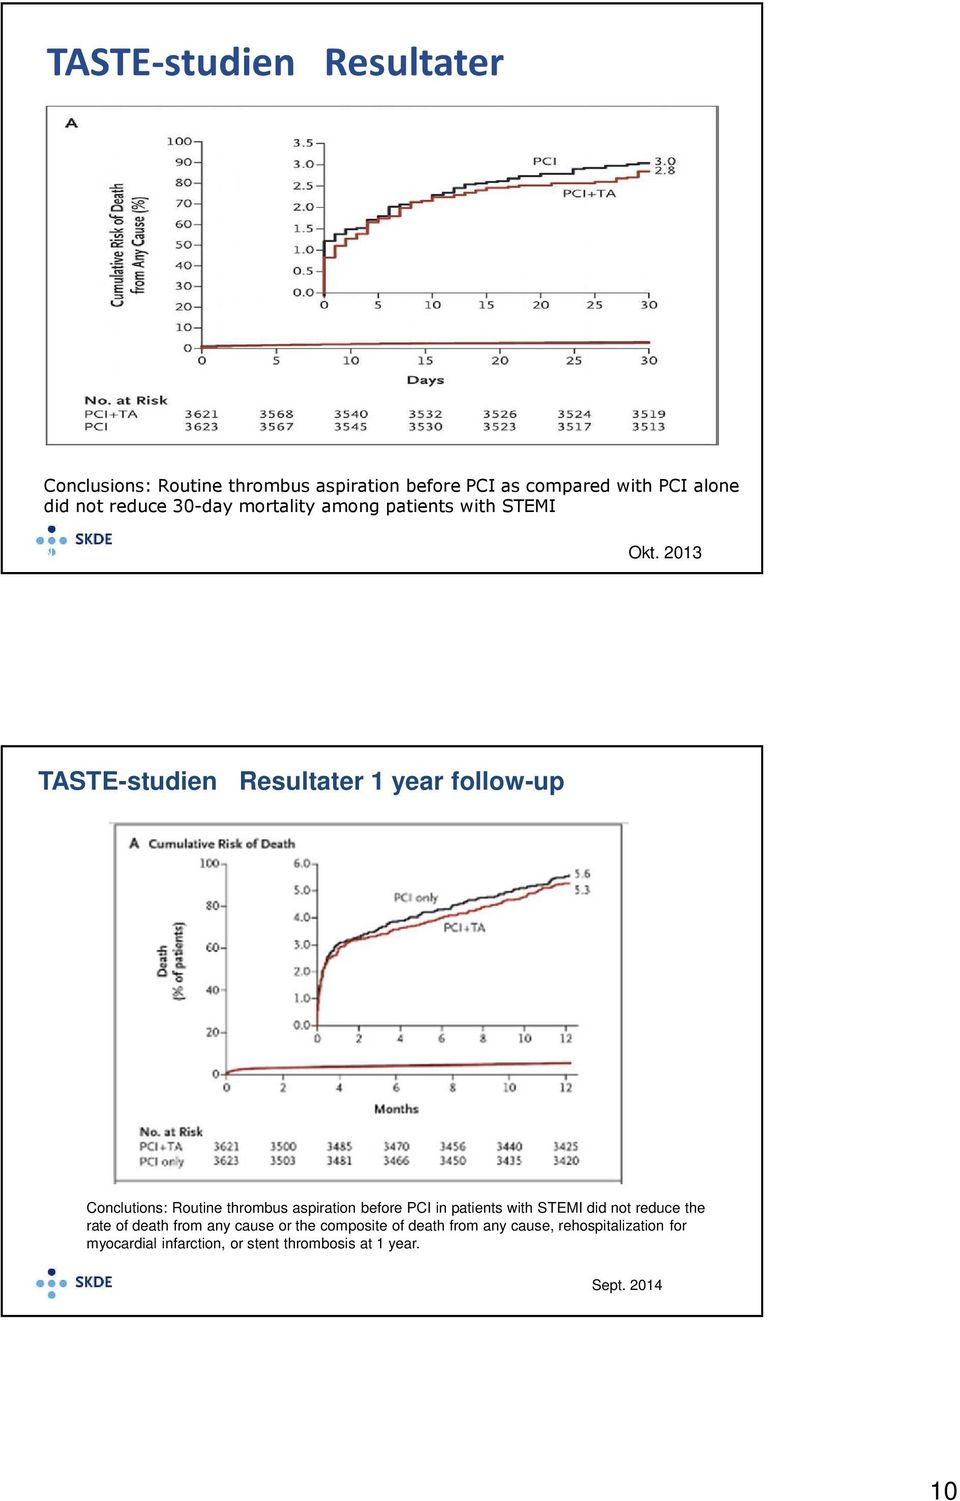 2013 TASTE-studien Resultater 1 year follow-up Conclutions: Routine thrombus aspiration before PCI in patients with STEMI did